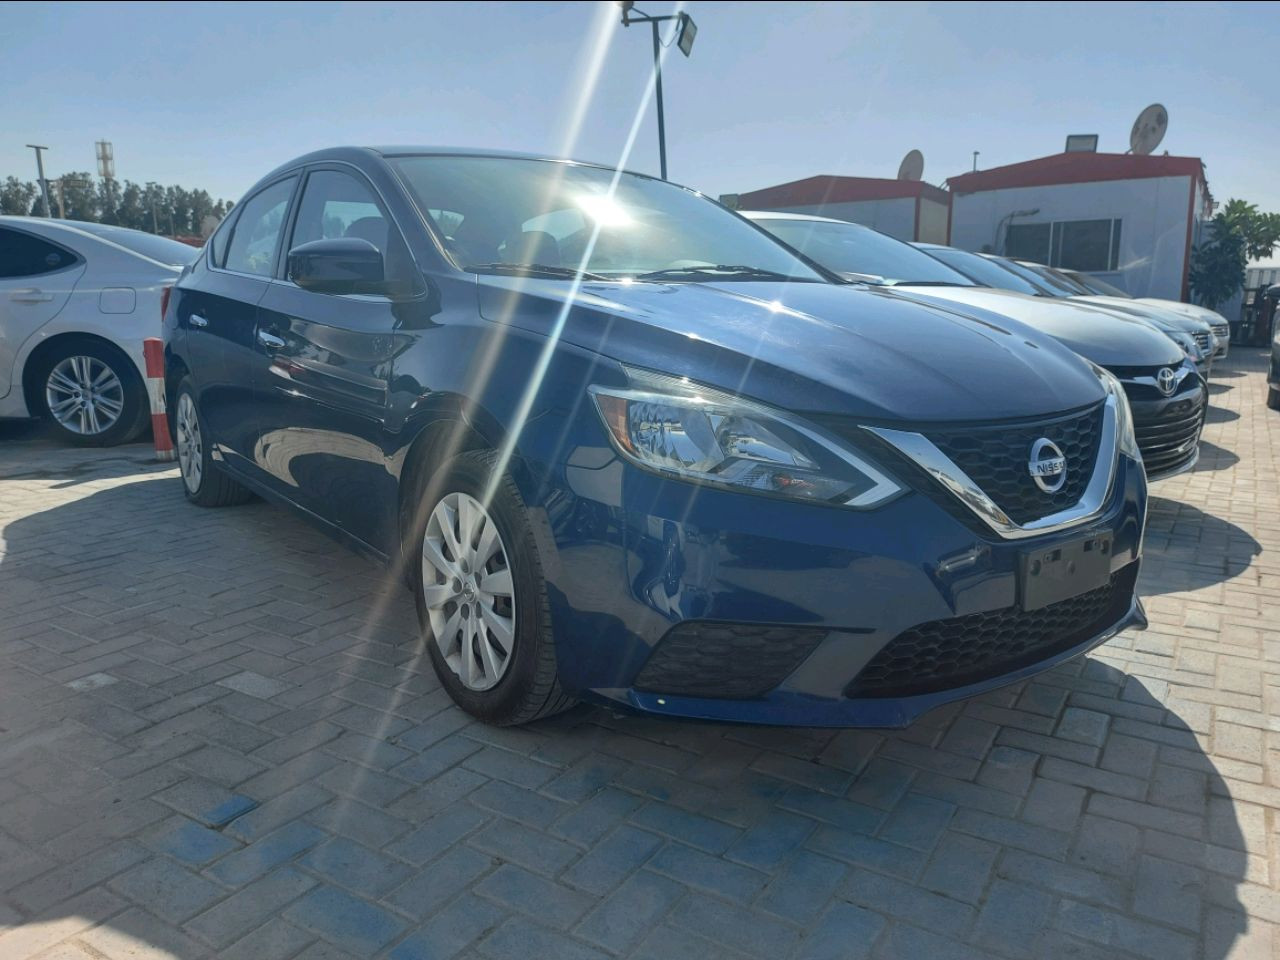 Nissan Sentra 2016 AED 18,500, US Spec, Negotiable